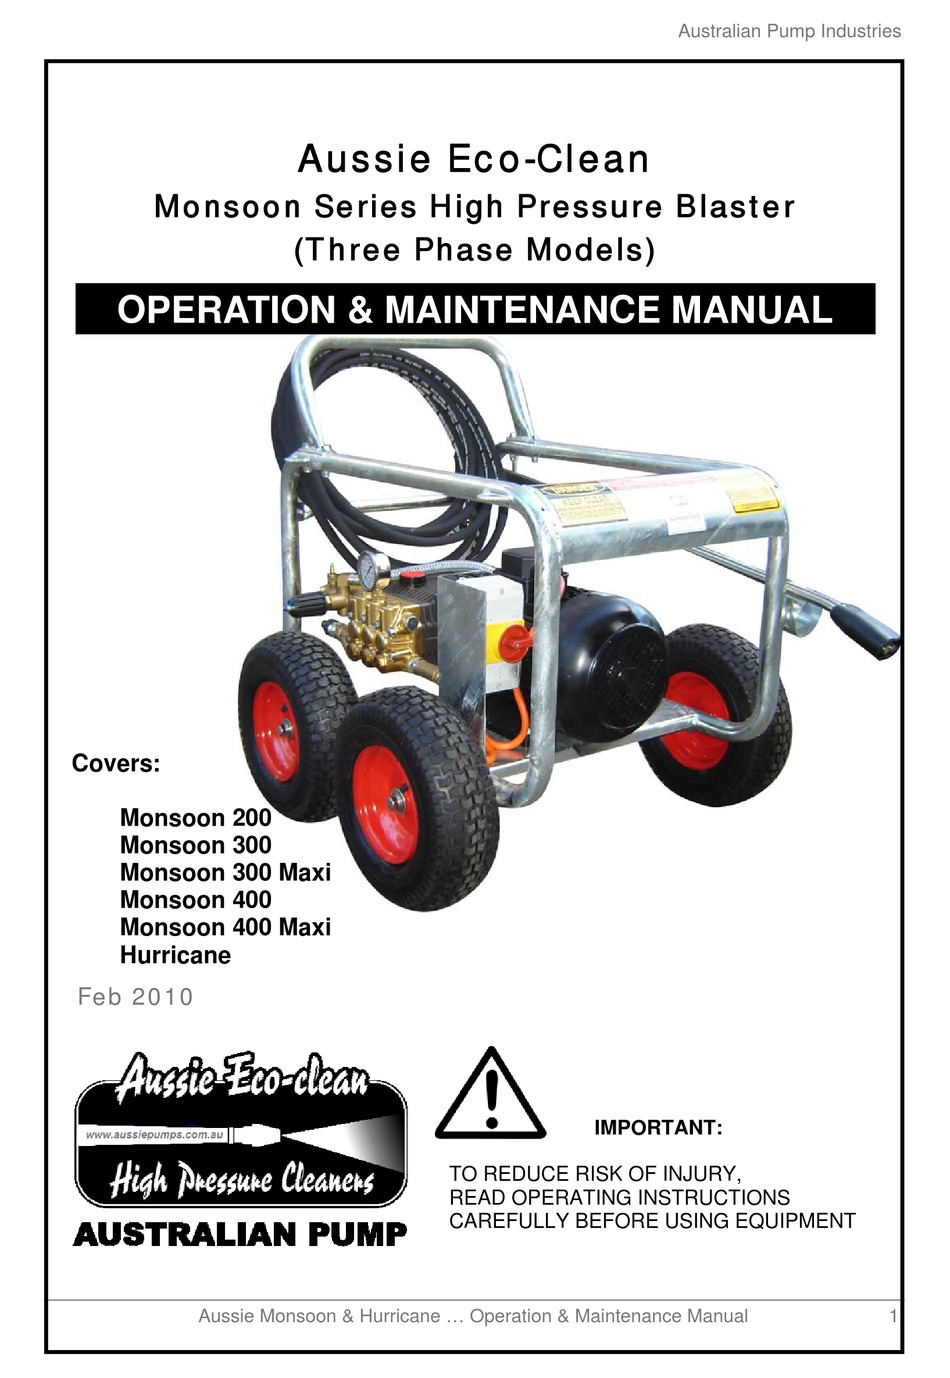 Care And Maintenance - AUSSIE ECO-CLEAN Monsoon 200 Maintenance Manual  [Page 5]